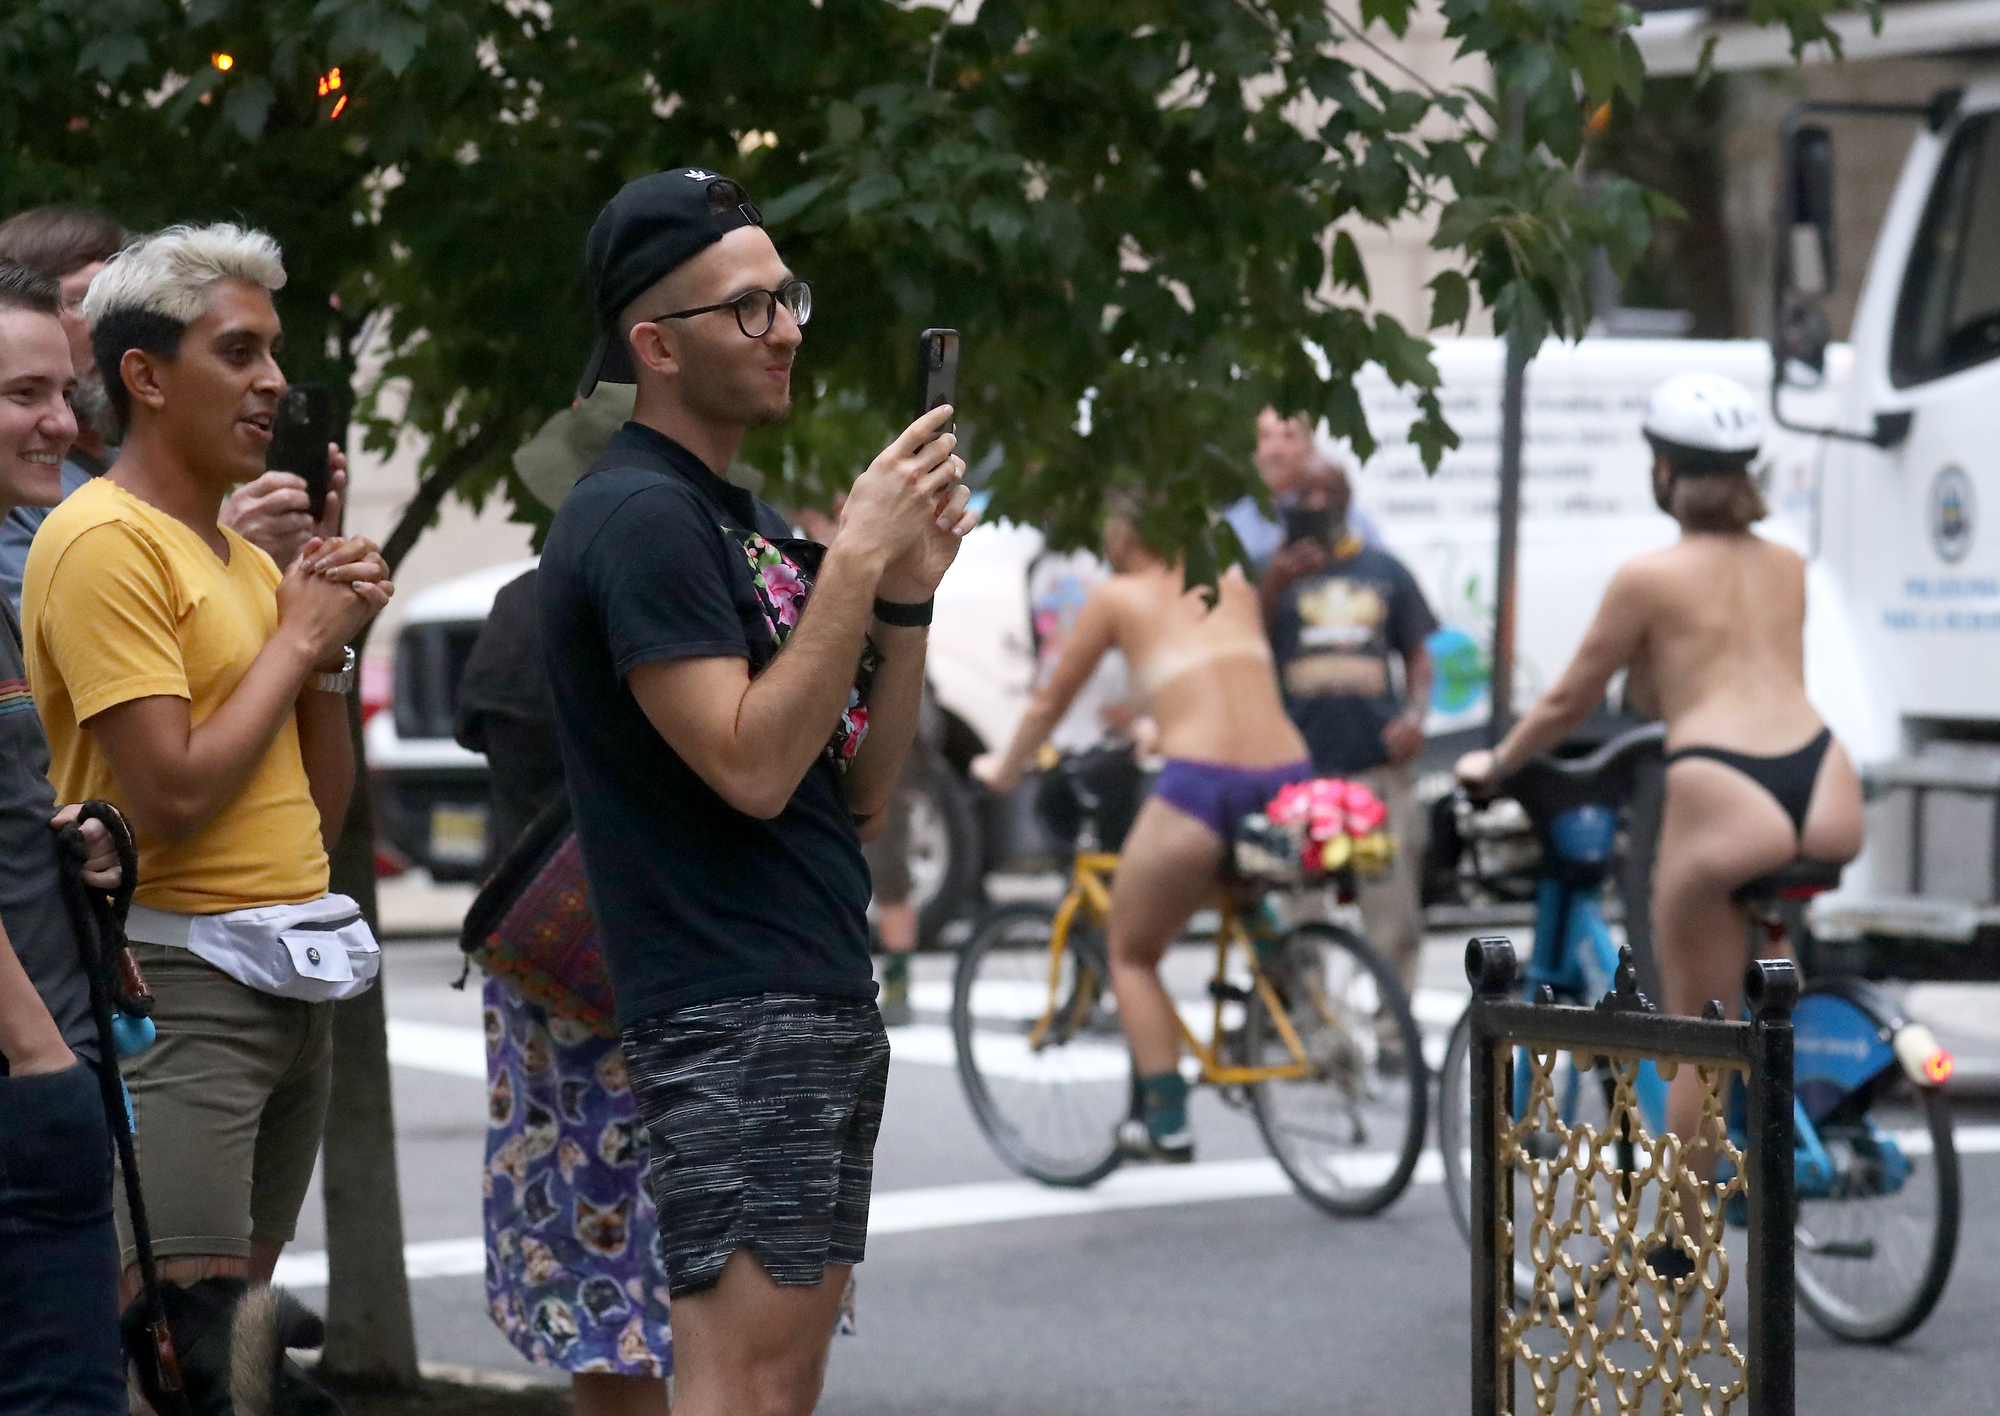 People watch and record participants in the the Philly Naked Bike Ride at Rittenhouse Square in Philadelphia Saturday, Aug. 28, 2021.